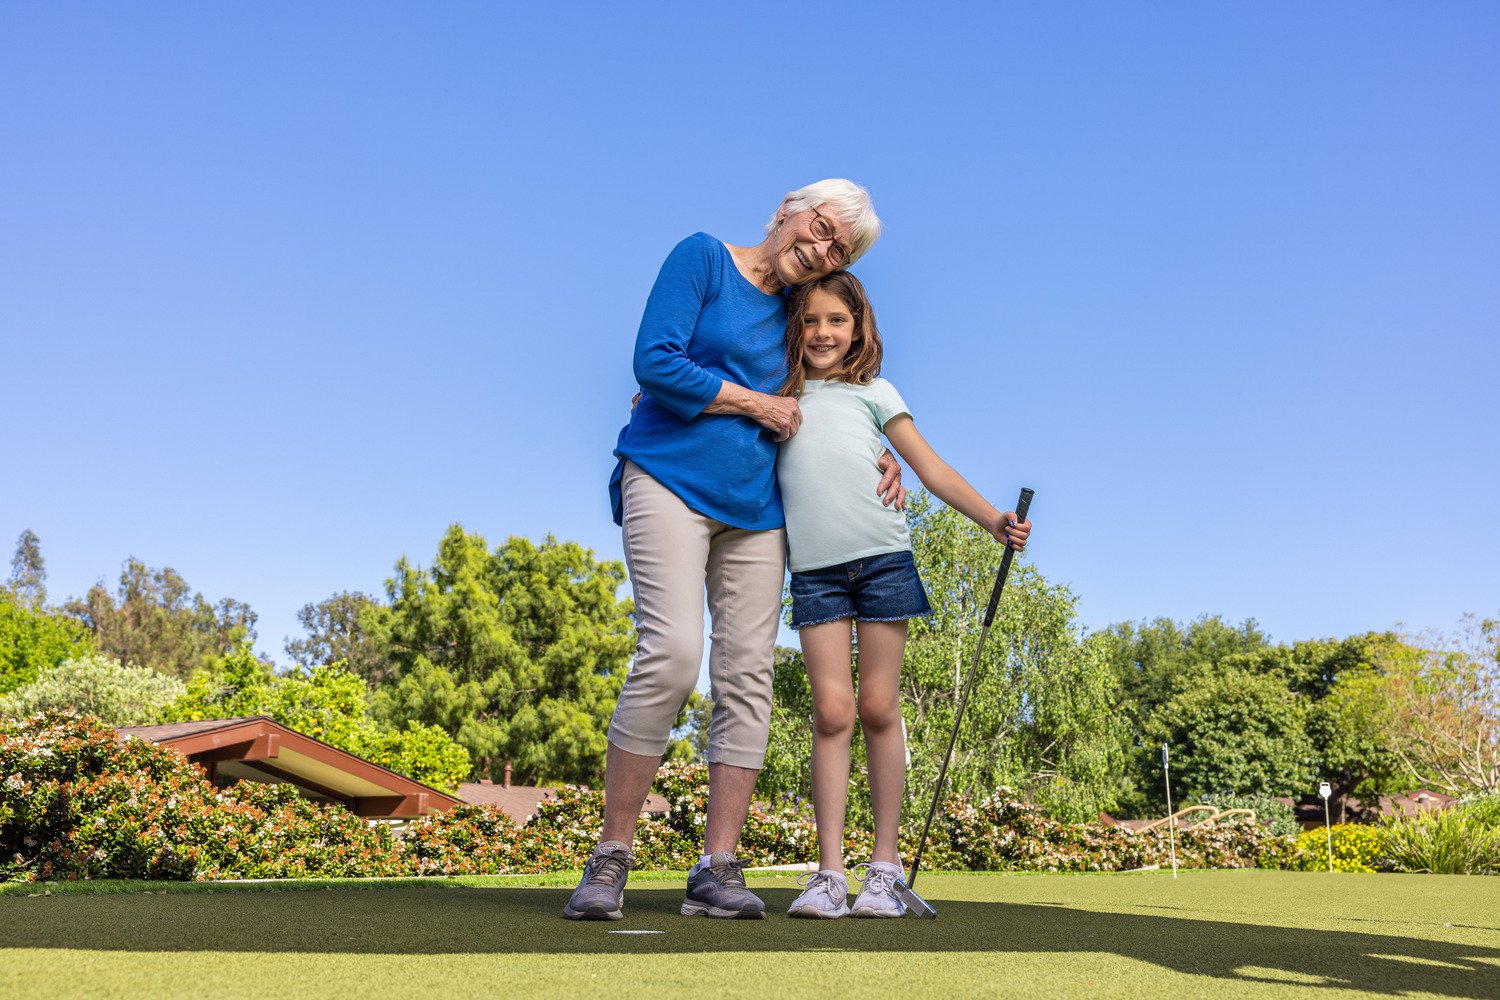 Gramma playing golf with granddaughter 